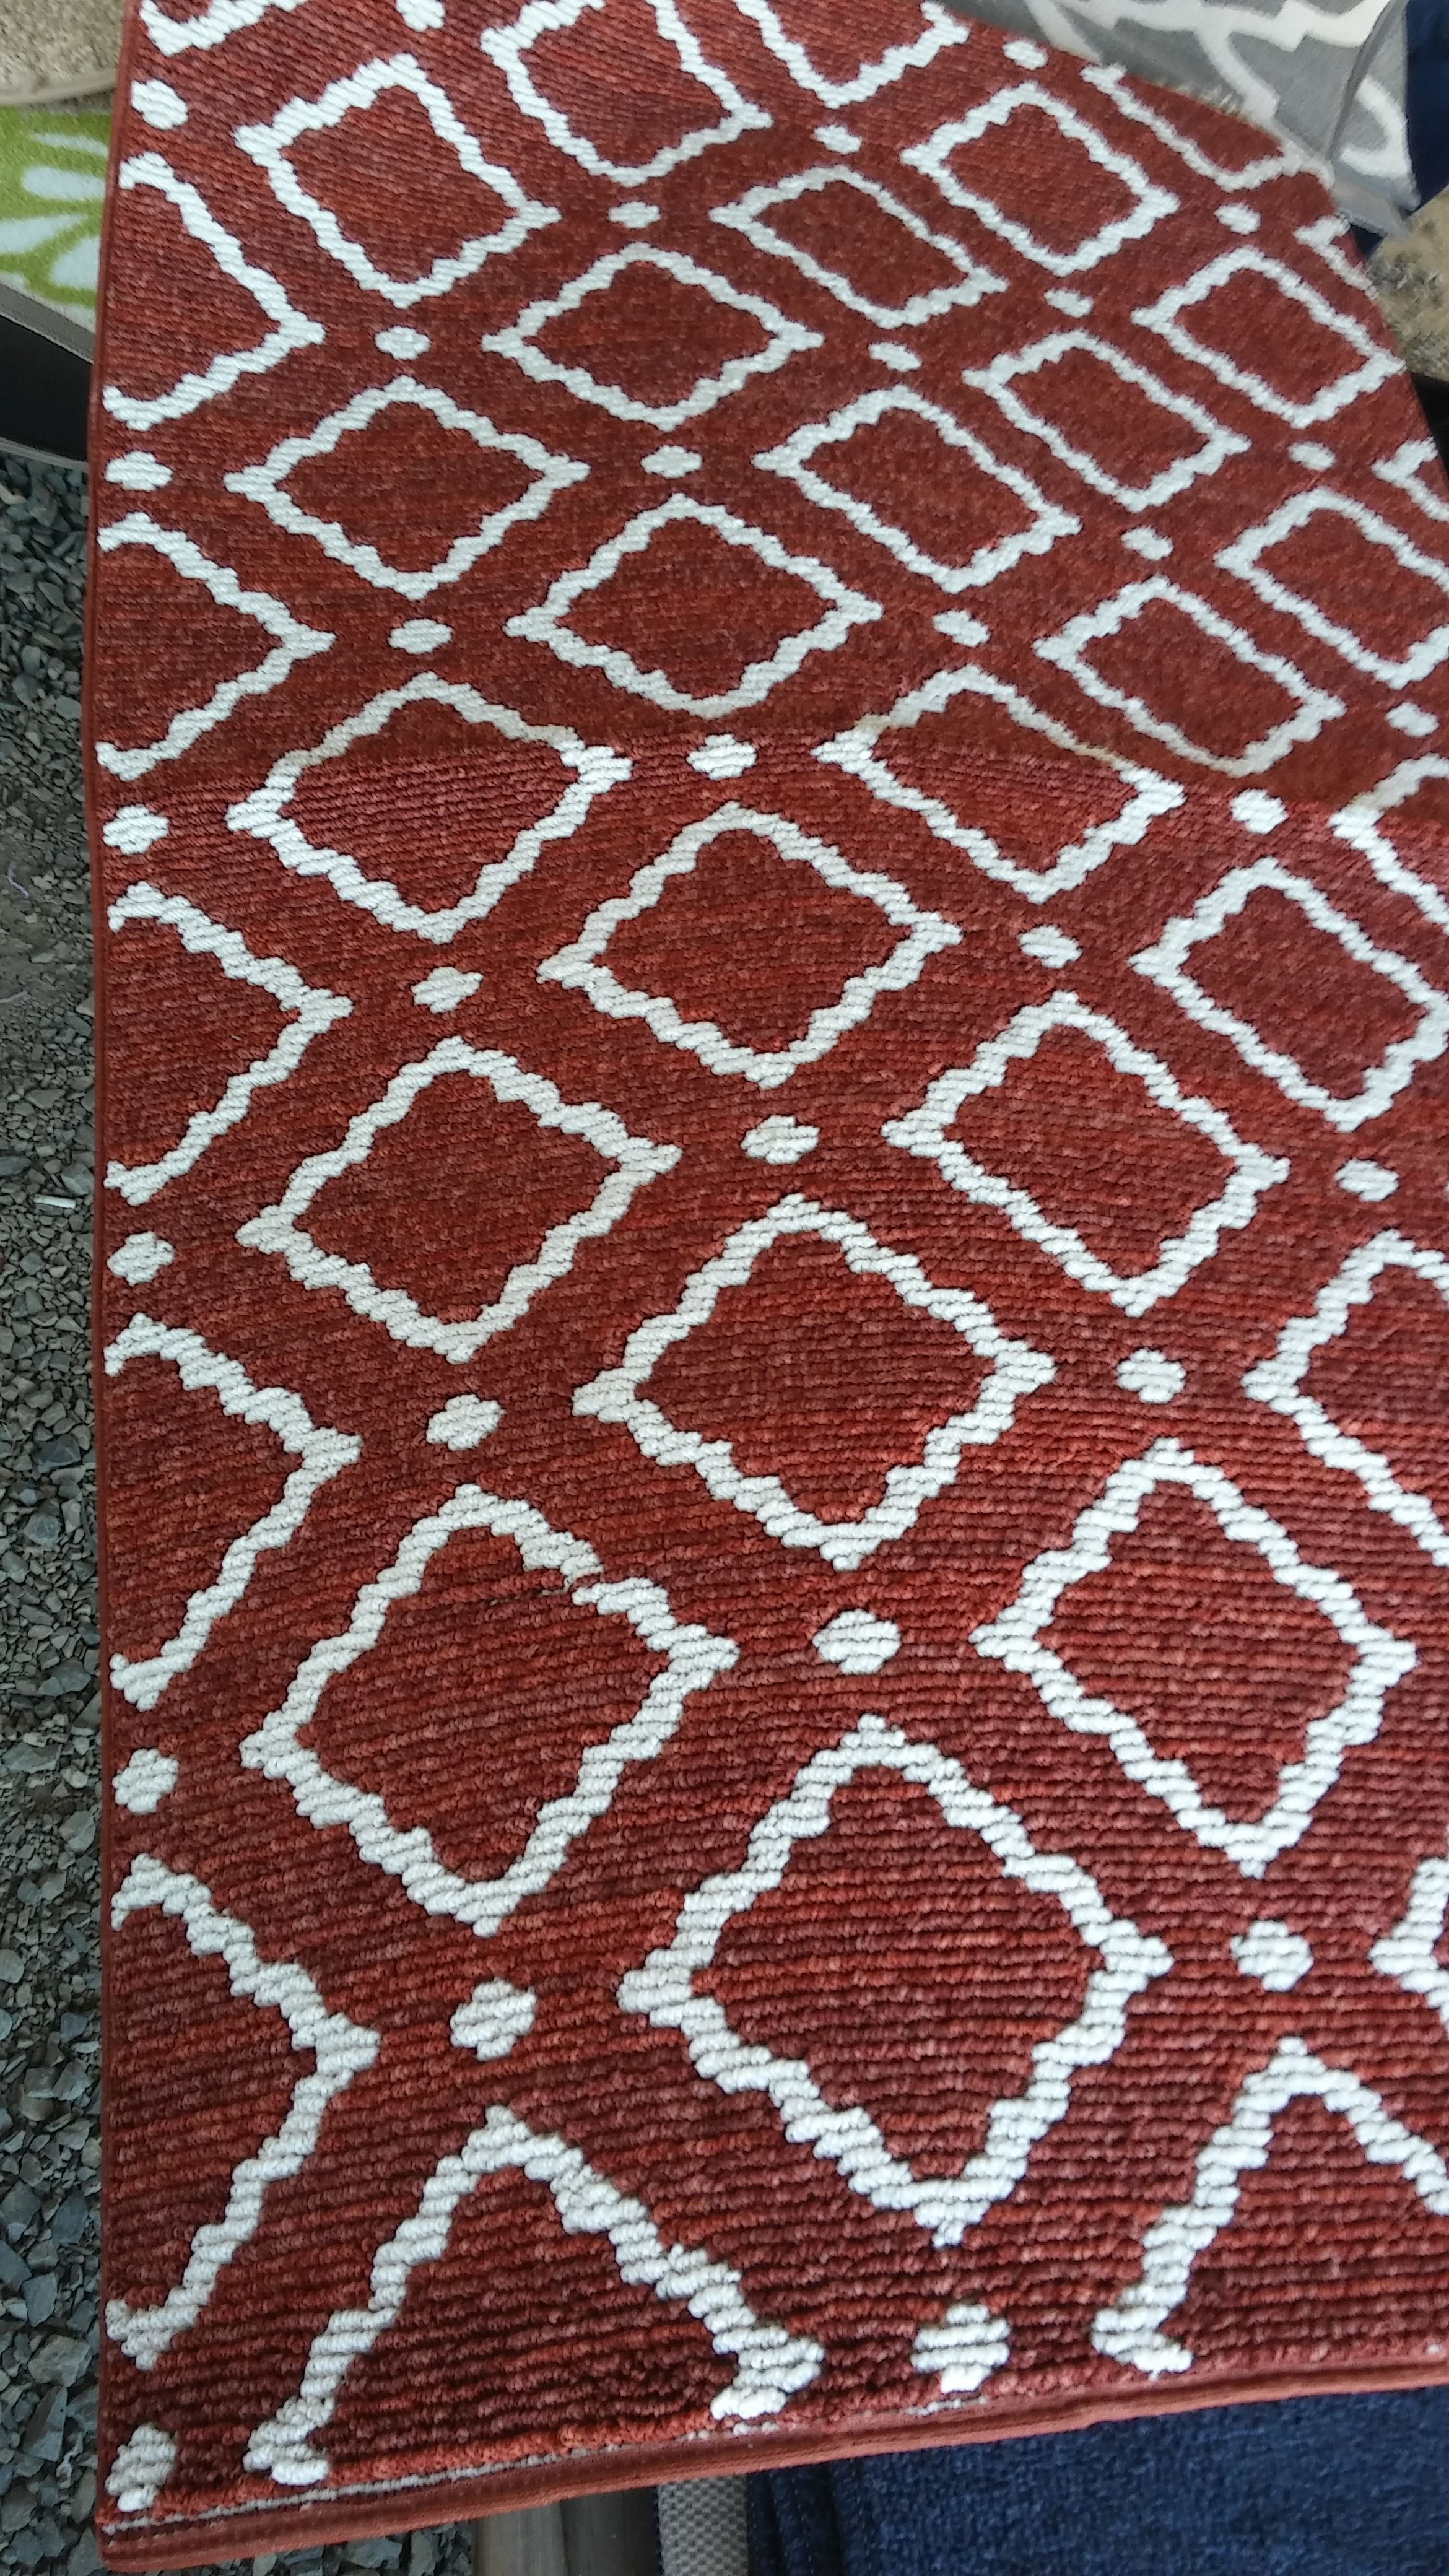 New 3x5 area rug thick heavy made